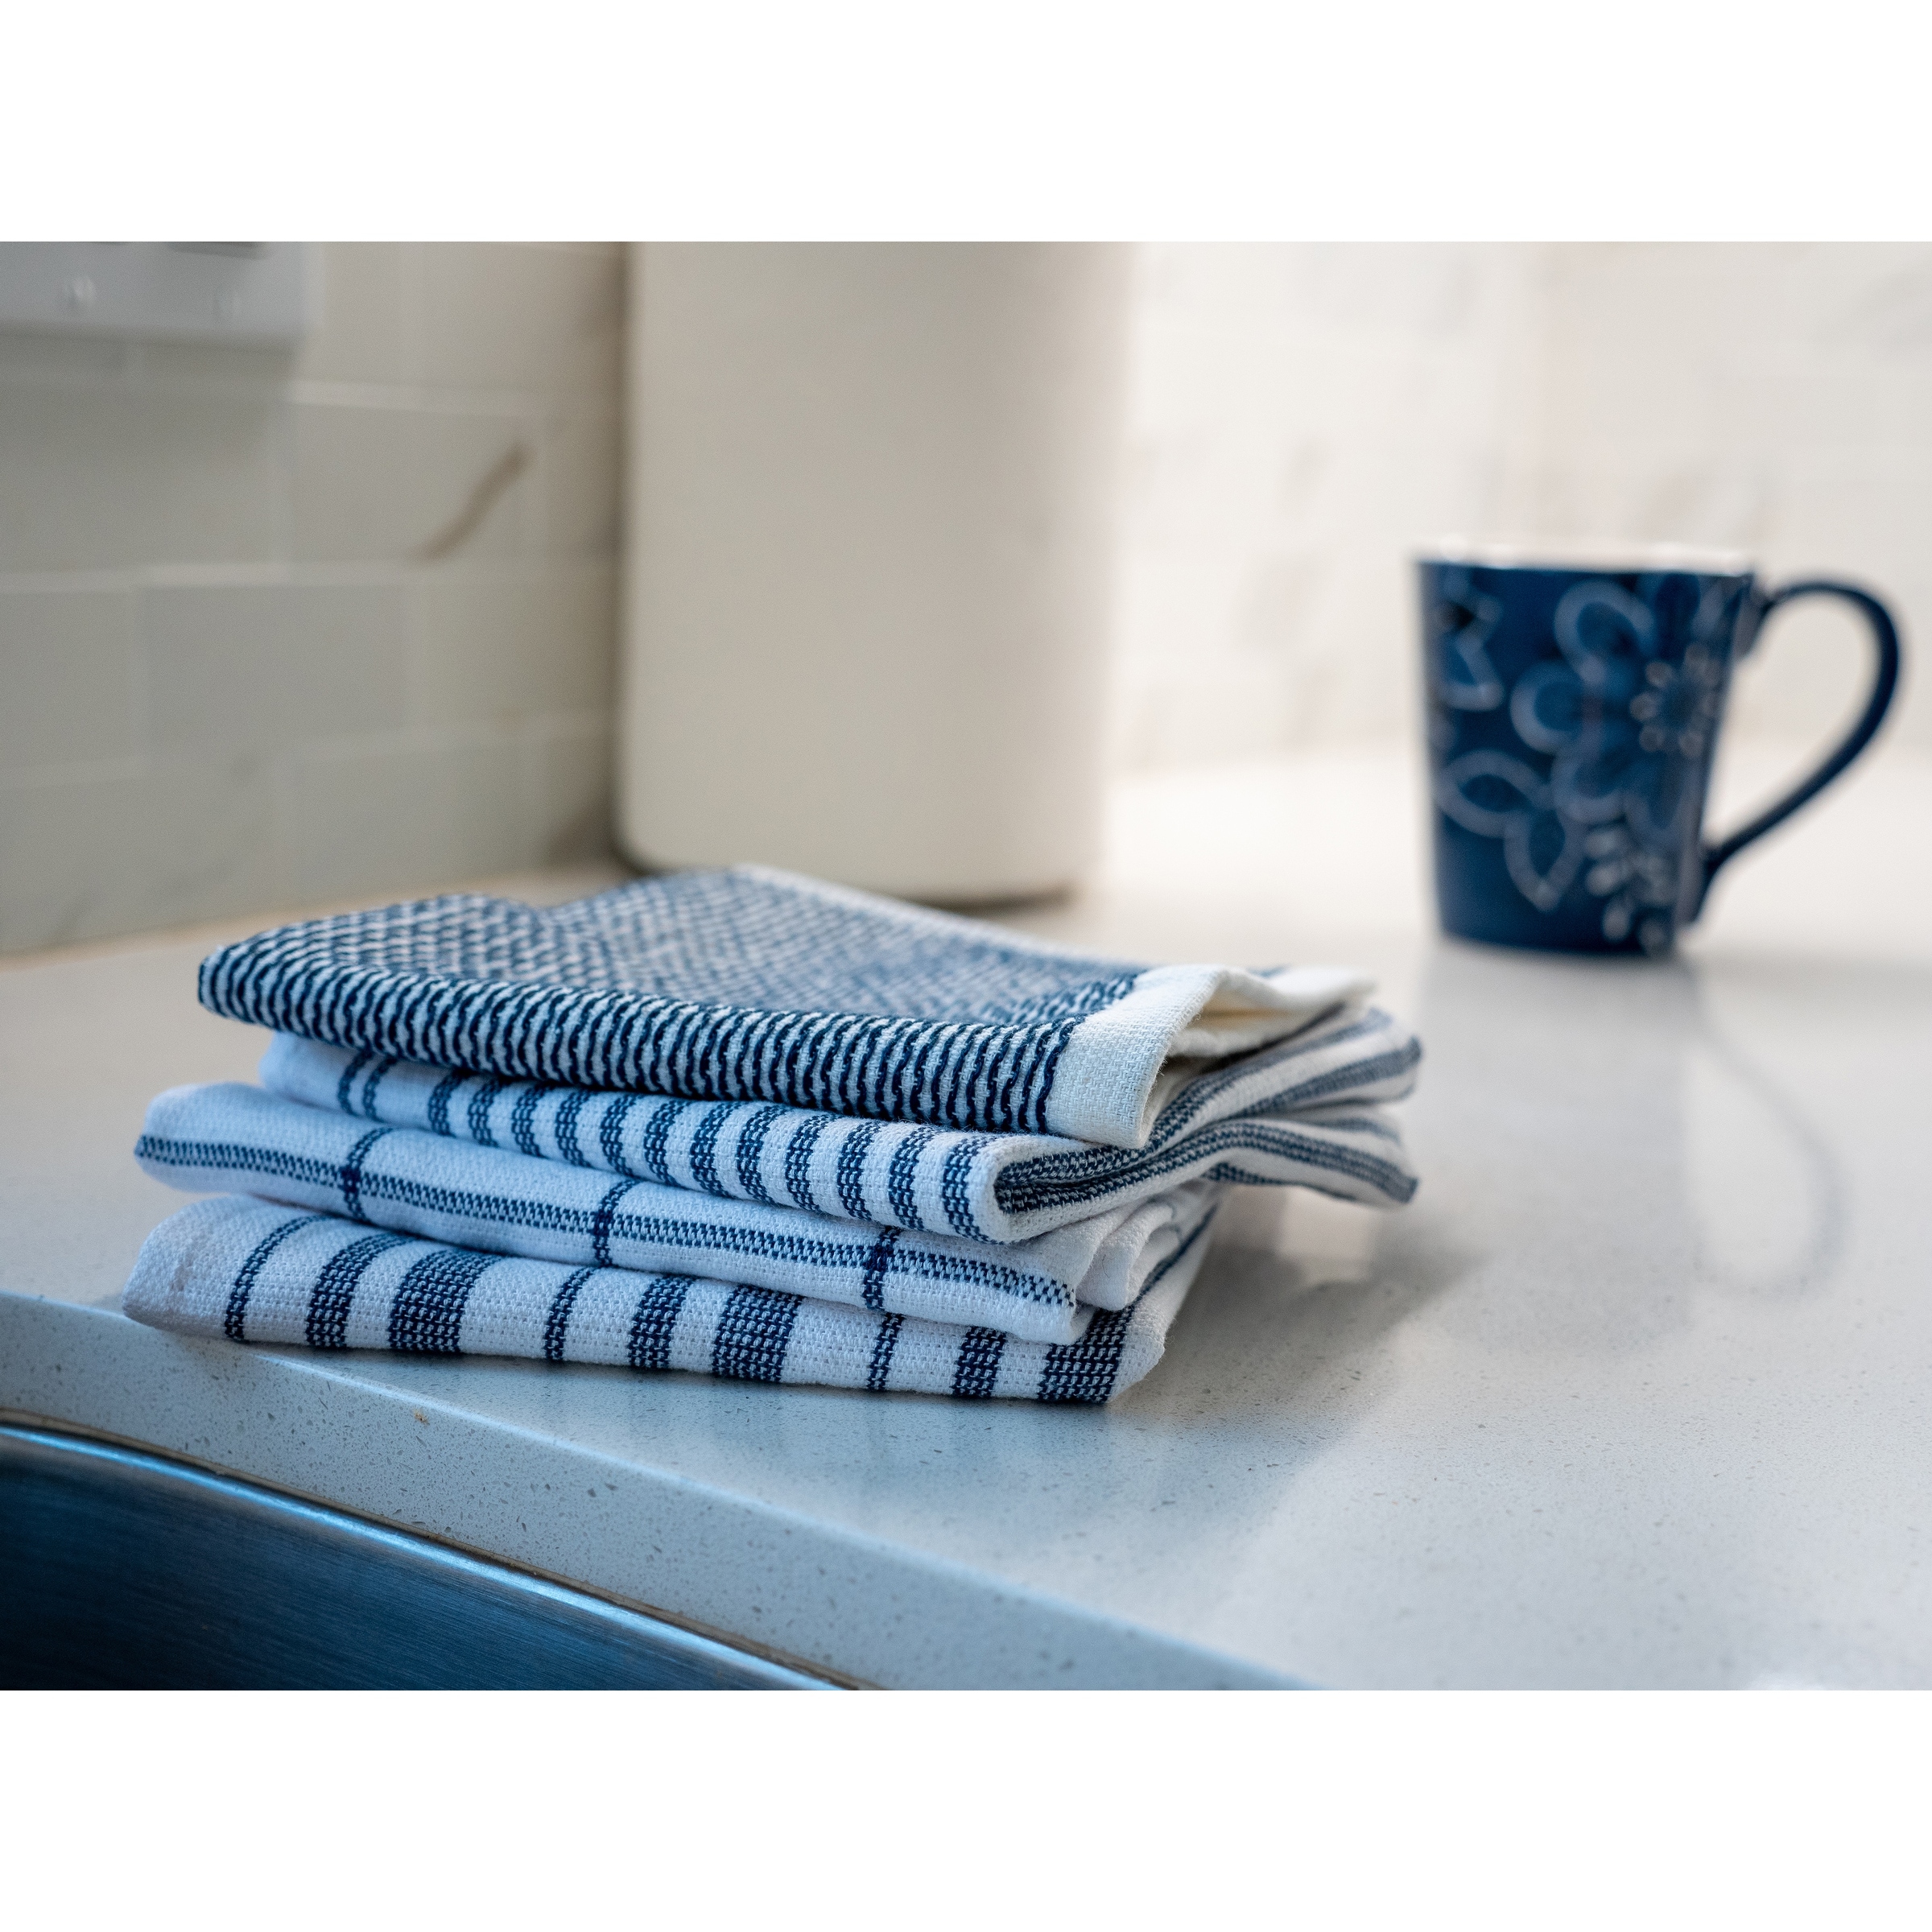 Our Table Solid Kitchen Towels - Black - 2 ct